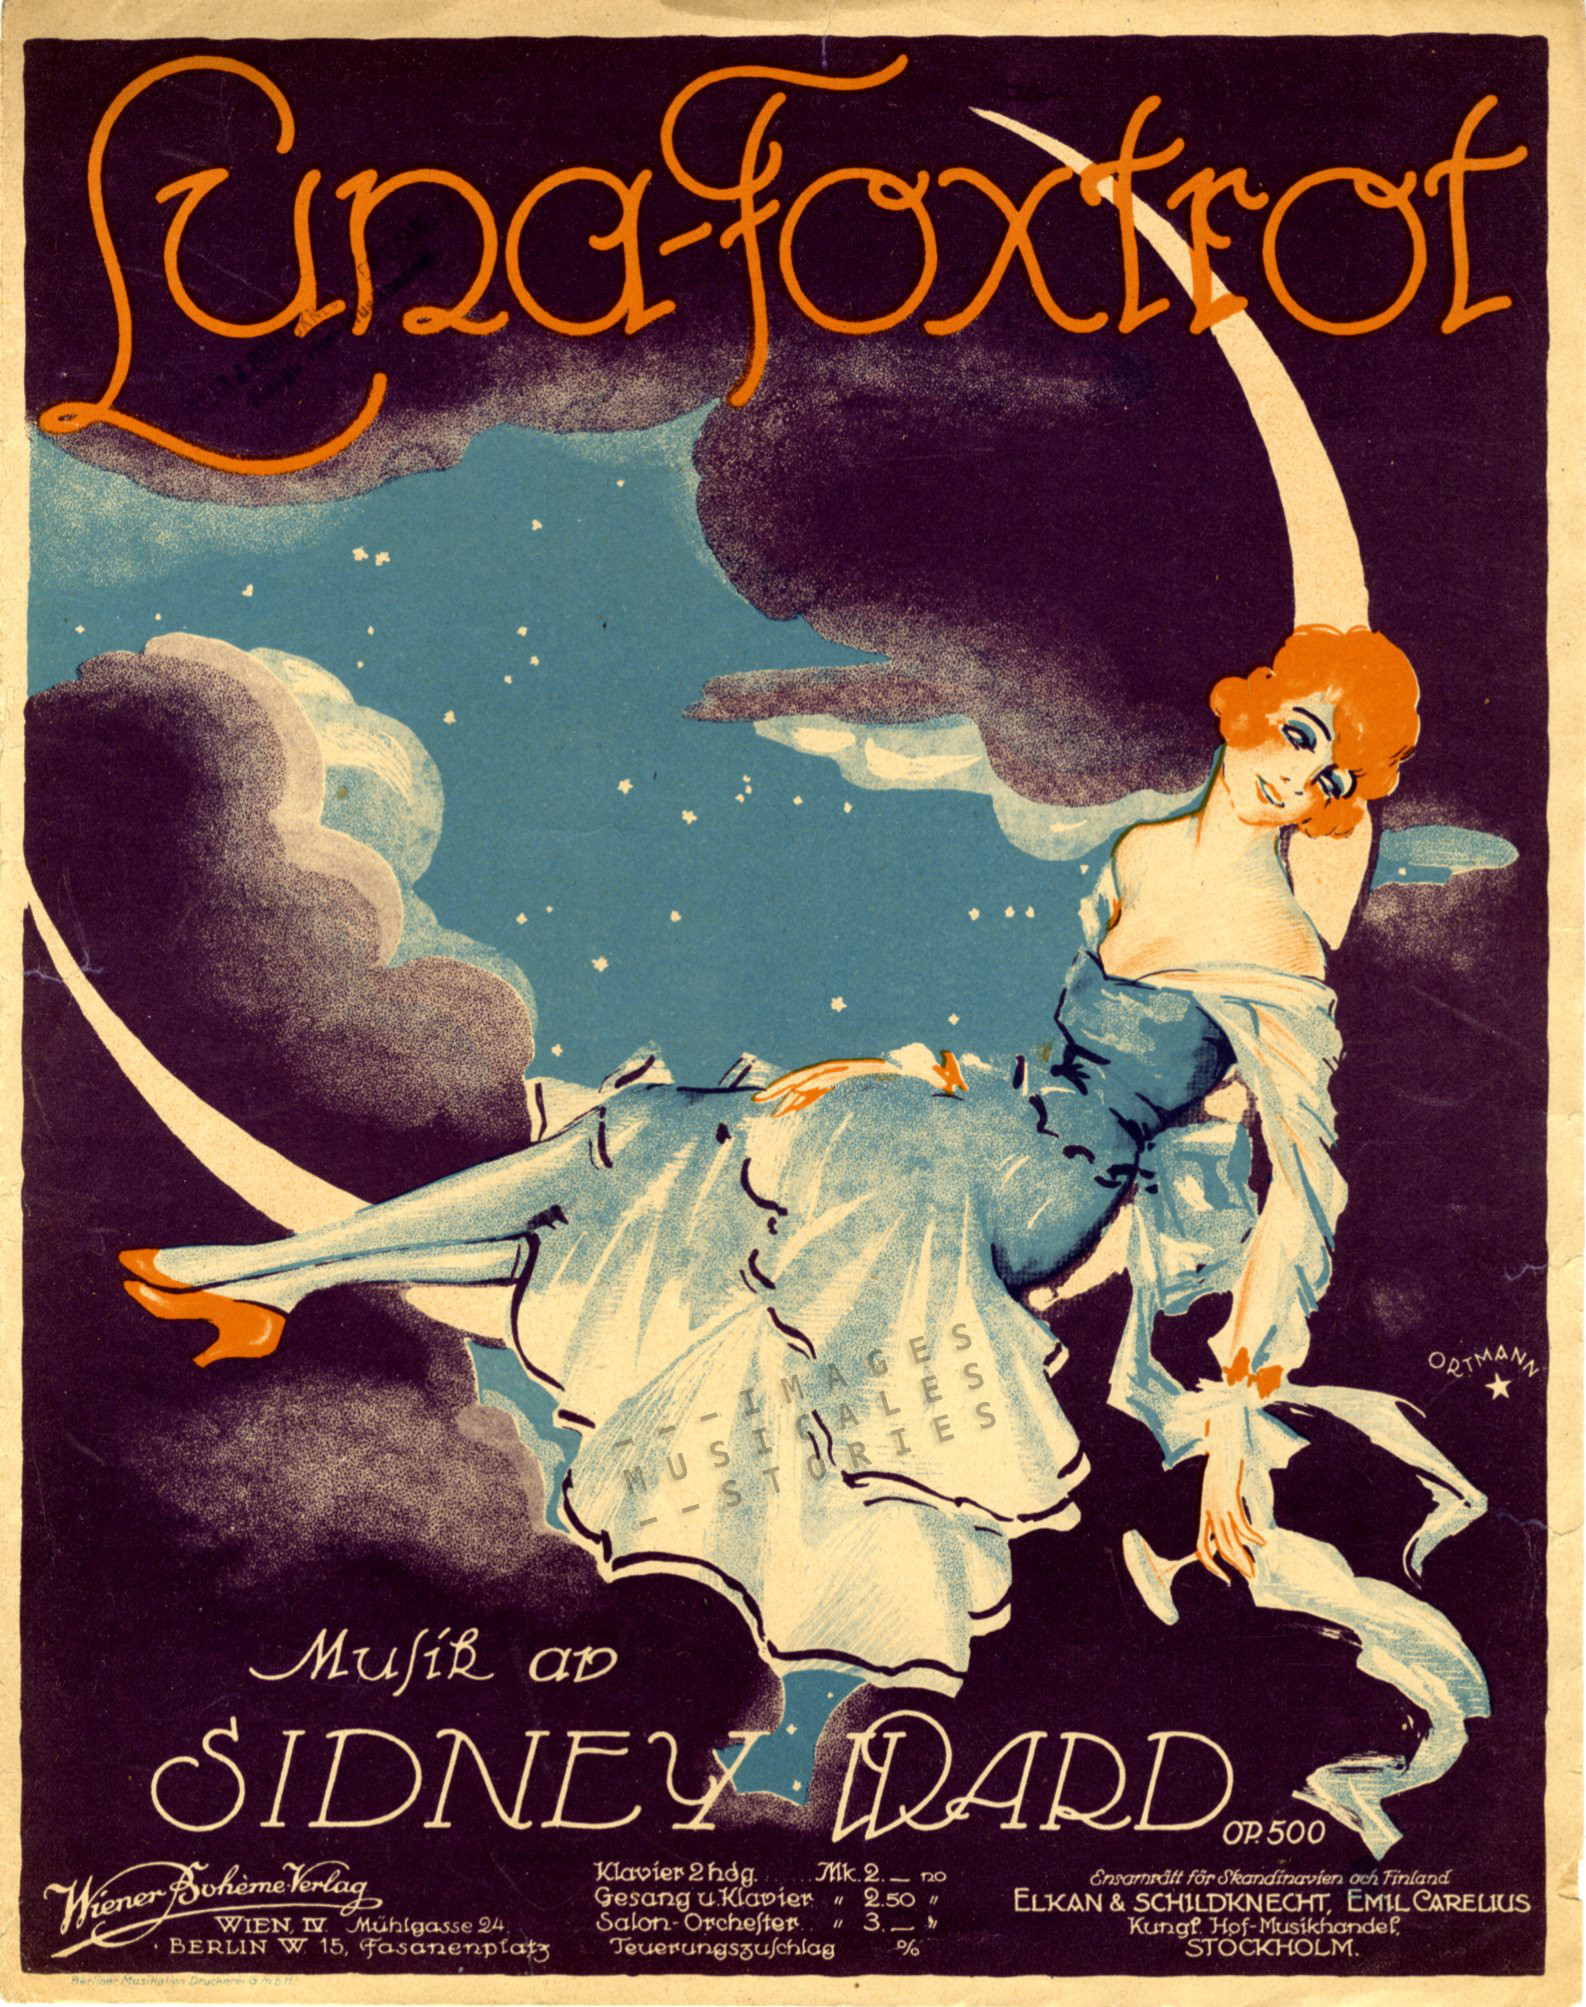 Sheet music cover of 'Luna-Foxtrot' by Sydney Ward (Siegwart Ehrlich). Published by Elkan & Schildknecht, Emil Carelius (Stockholm, 1920) and illustrated by Wolfgang Ortmann